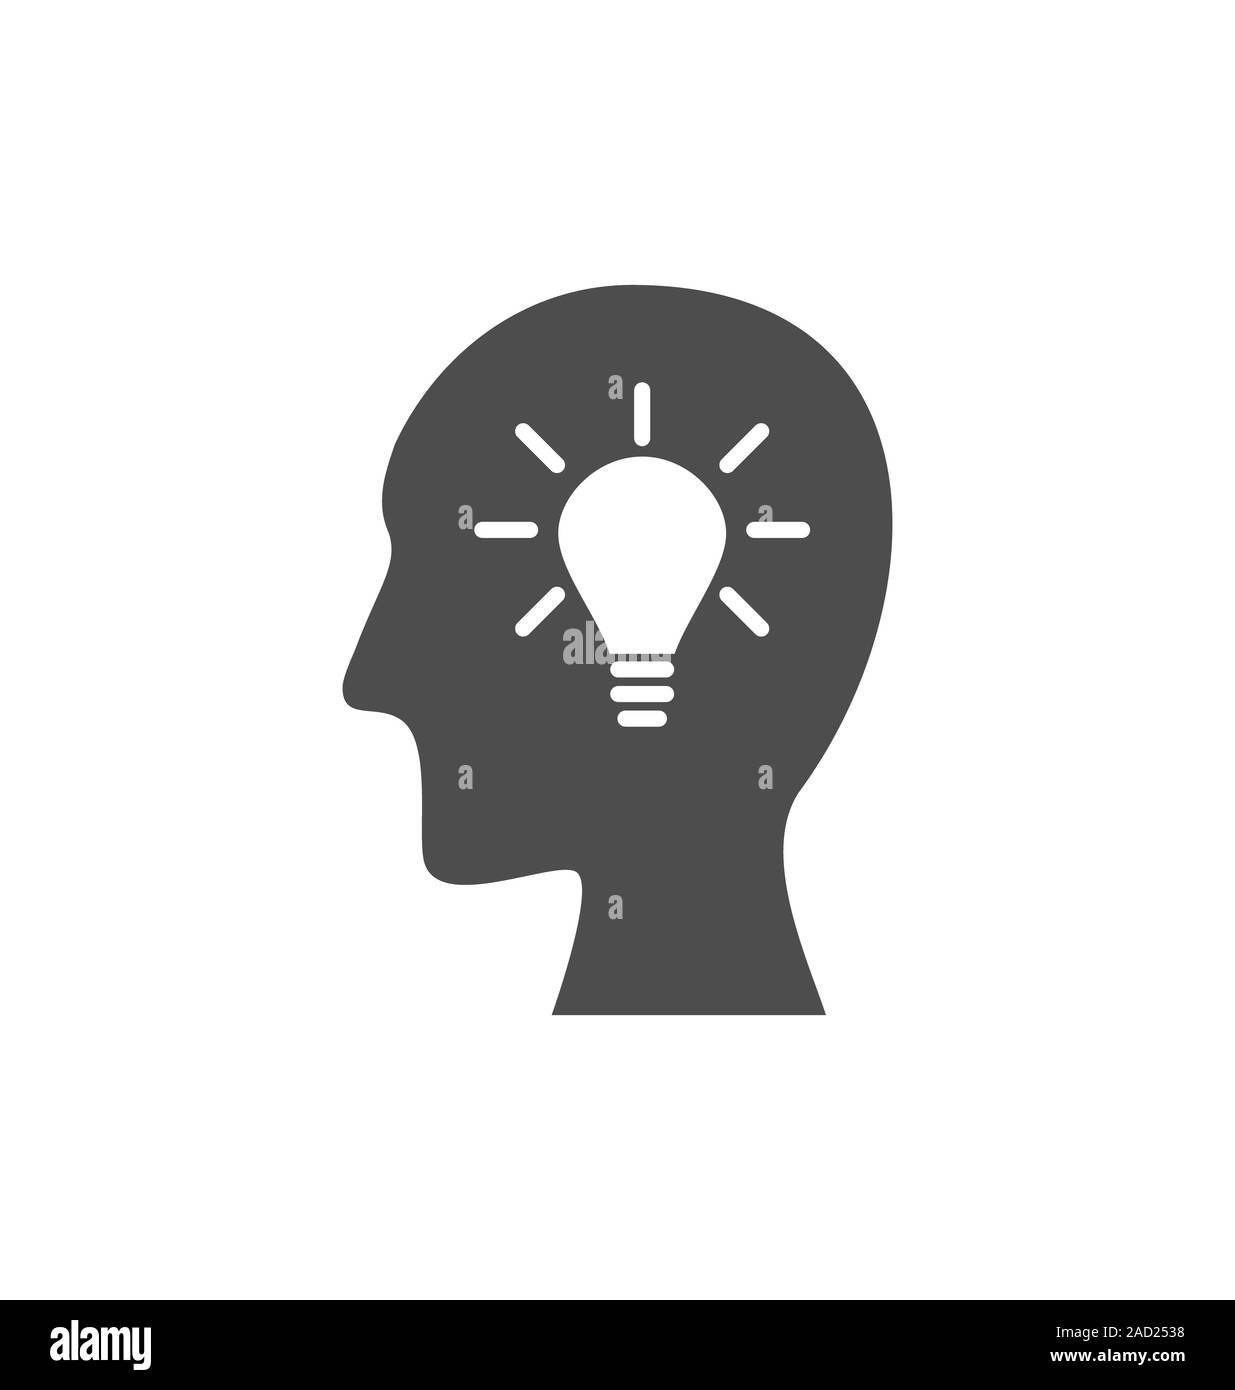 Icon process of generating ideas to solve problems, birth of the brilliant ideas Stock Photo